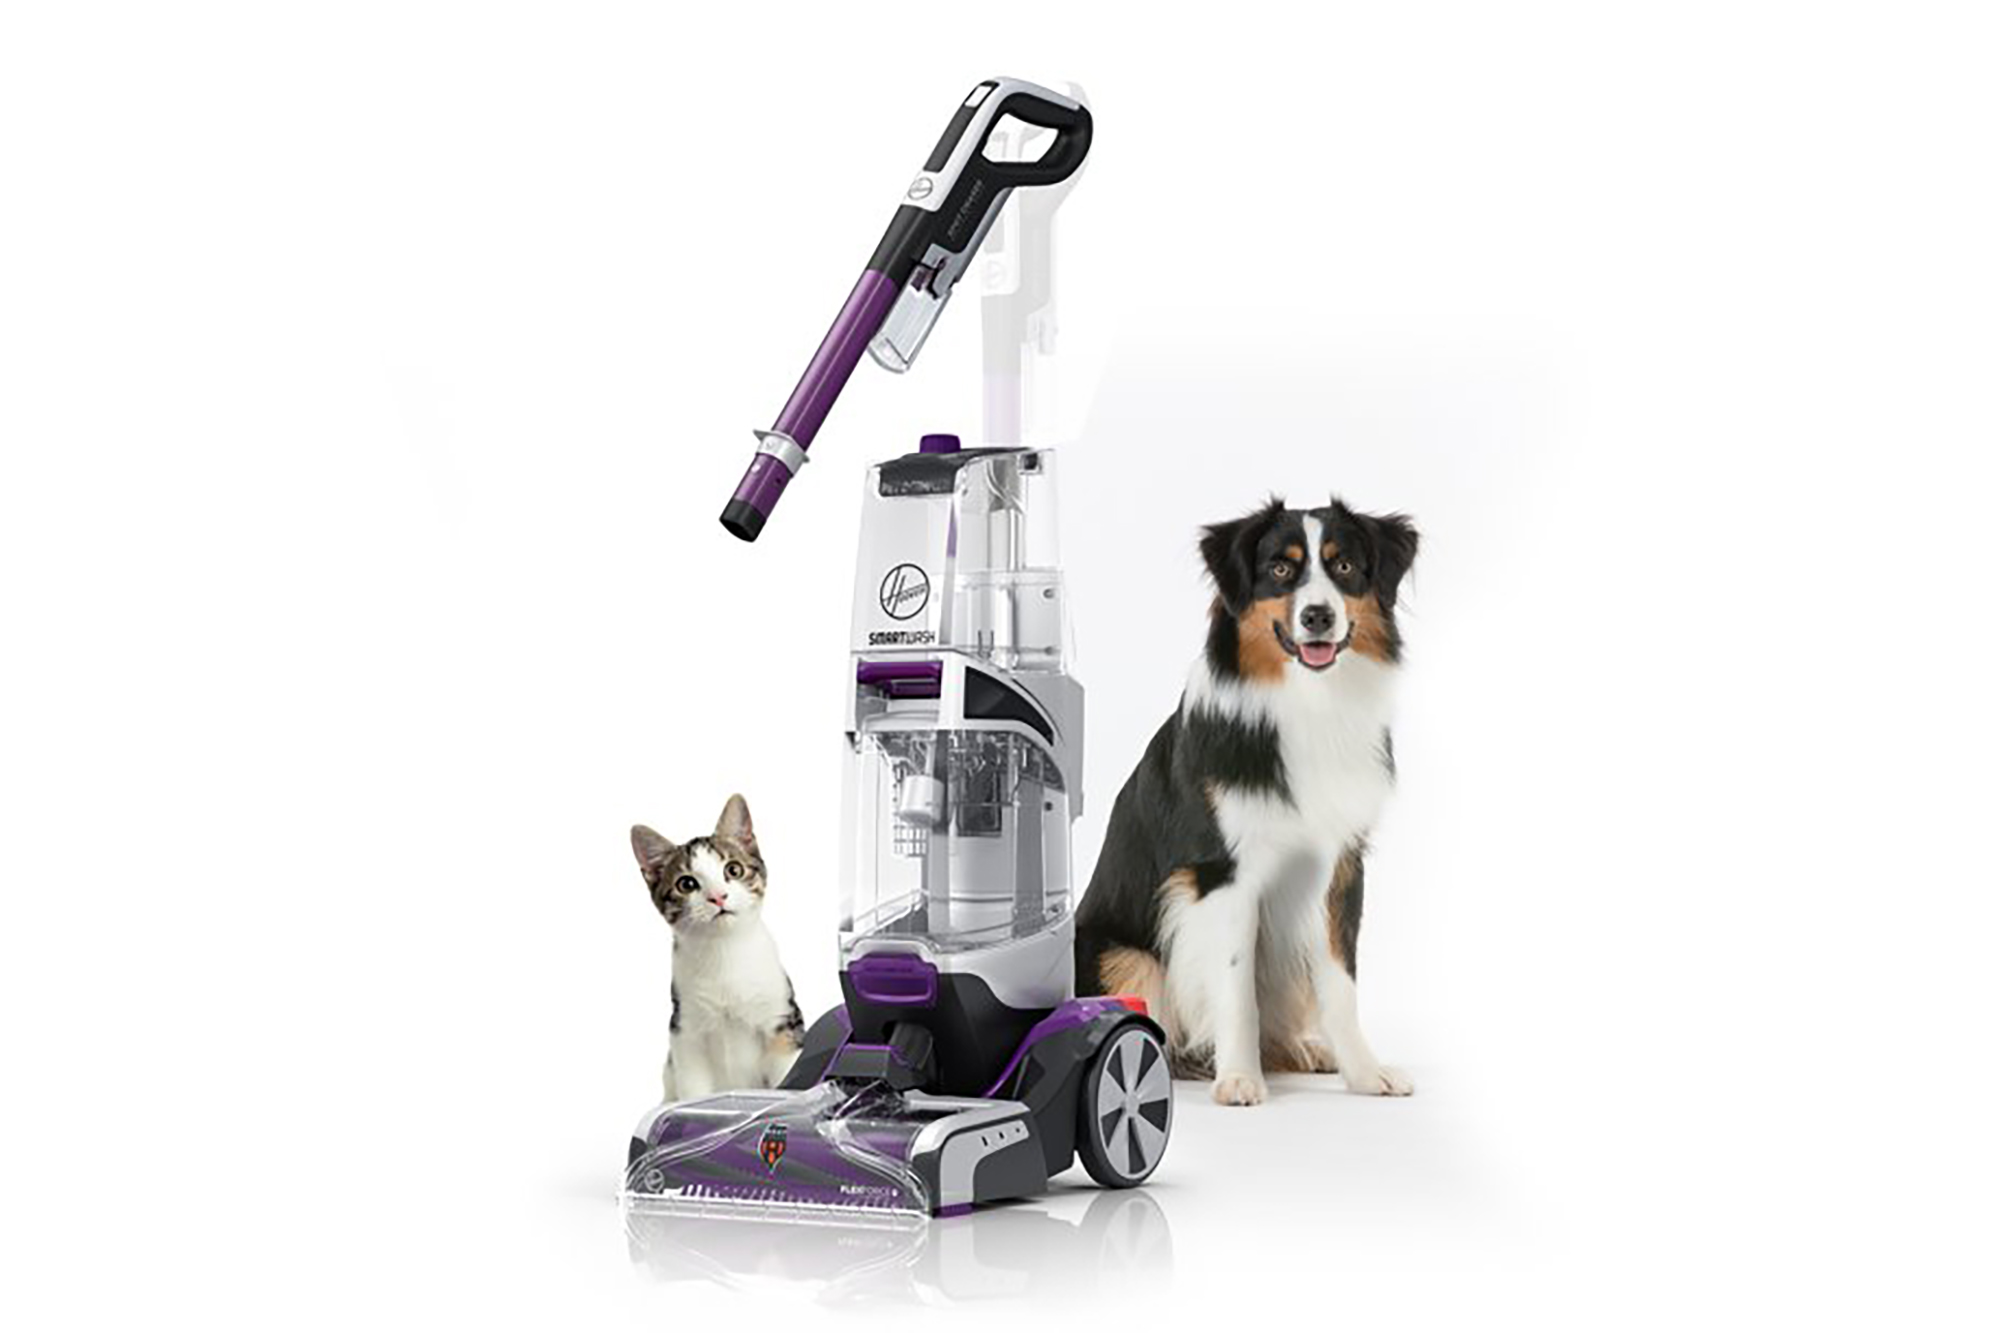 A cute cat and a dog sit next to a purple vacuum 